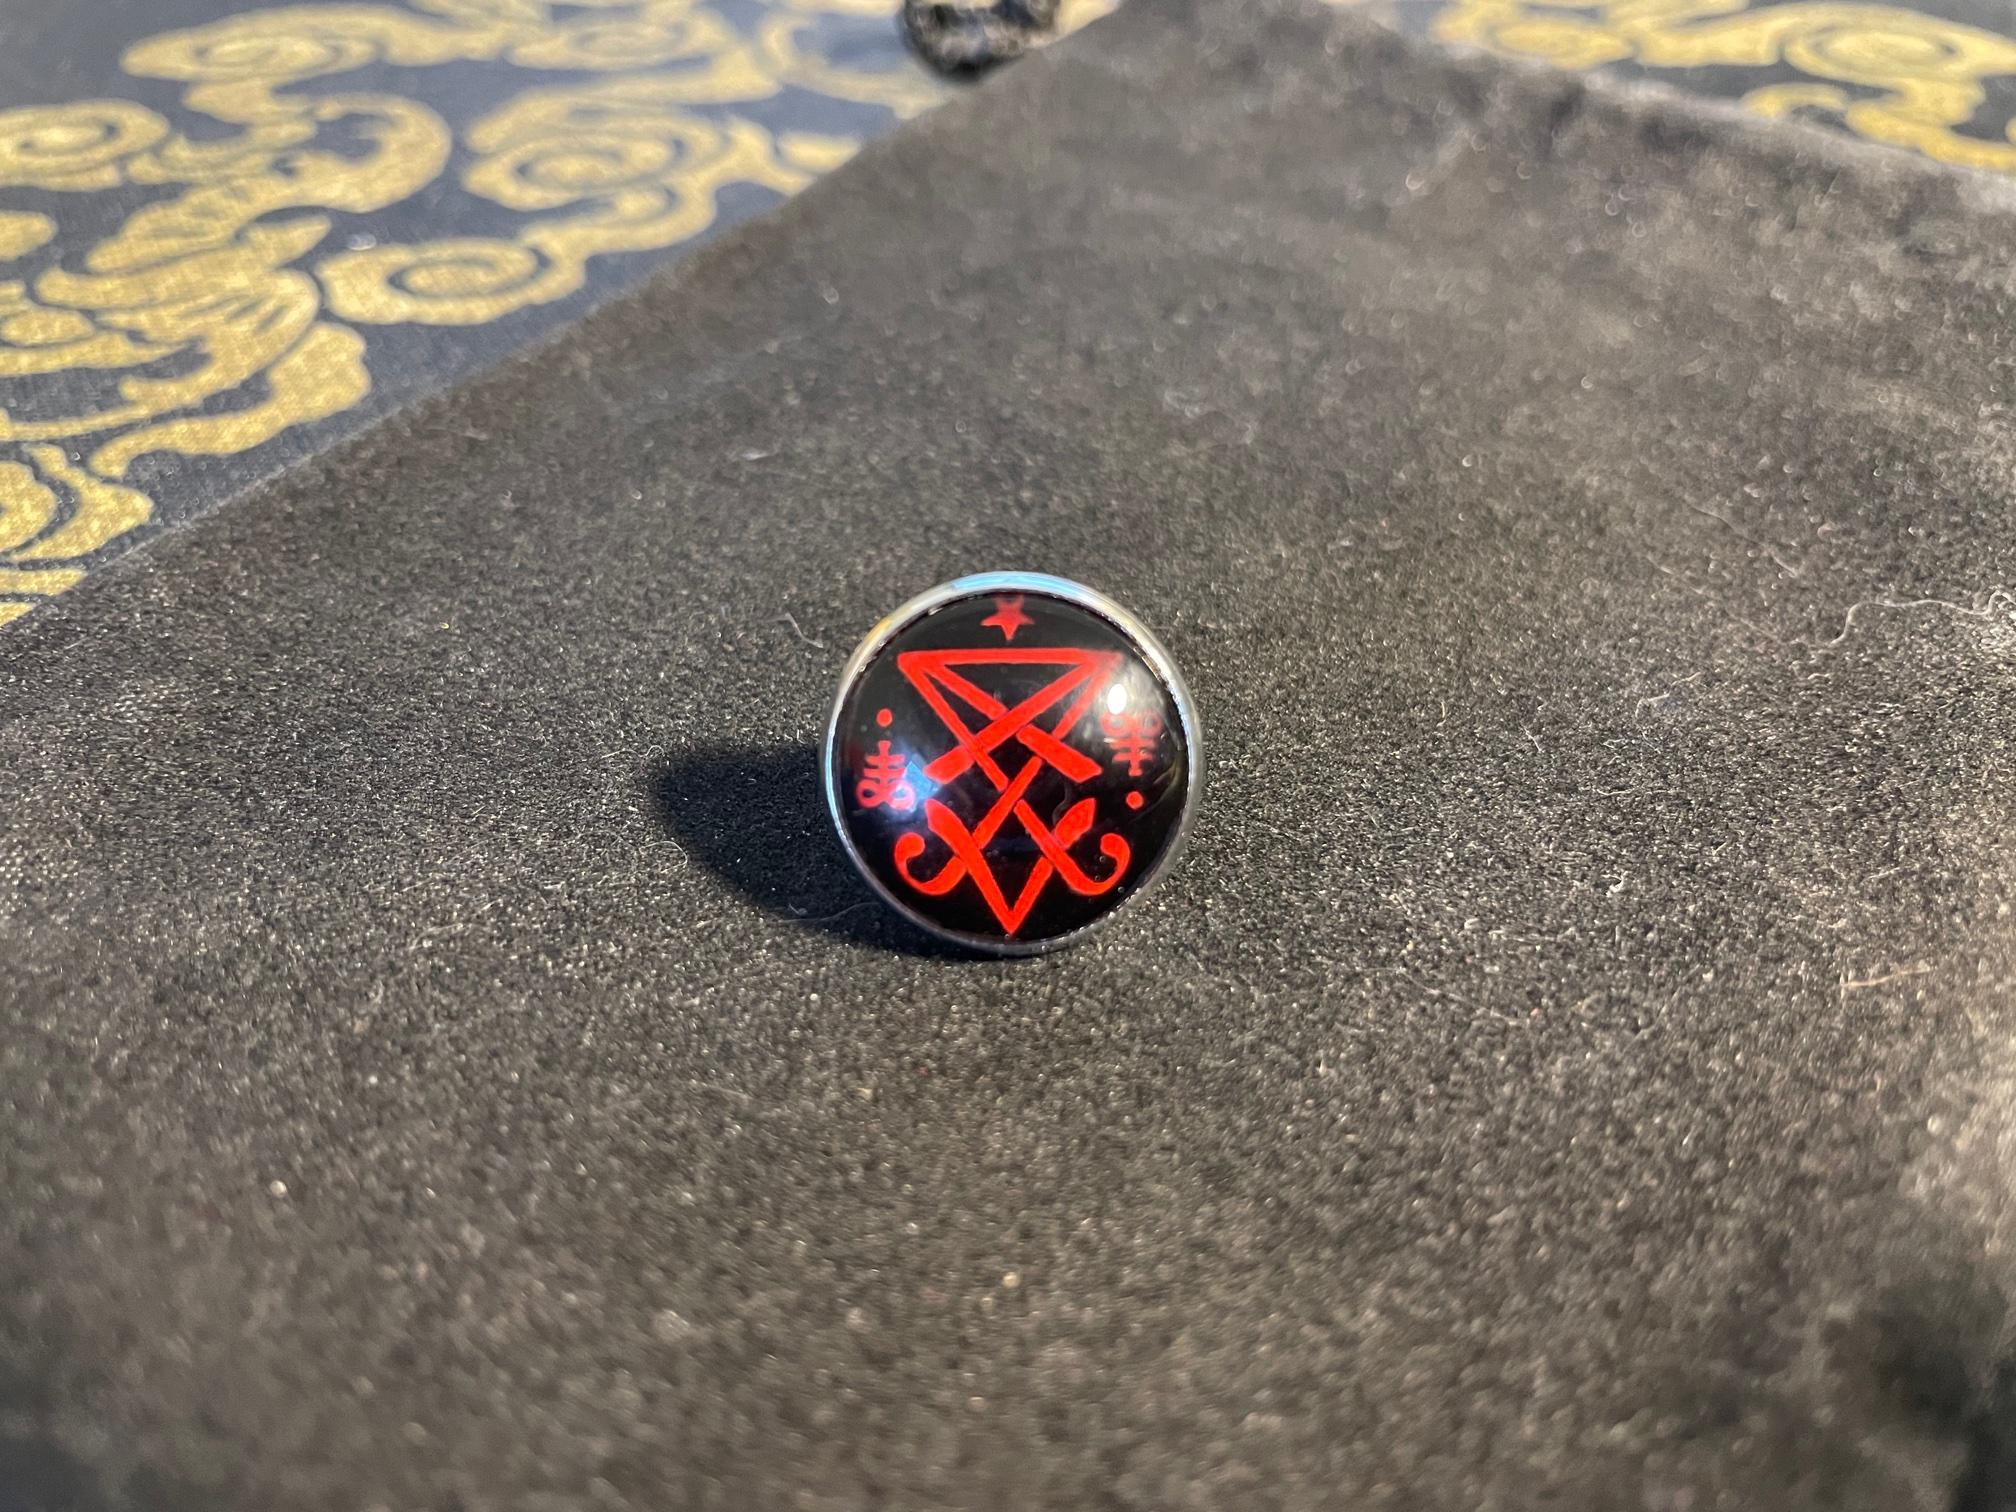 sigil of lucifer leviathan cross inverted pentagram star glass lapel pin satanic wiccan occult darkness jewelry black red color